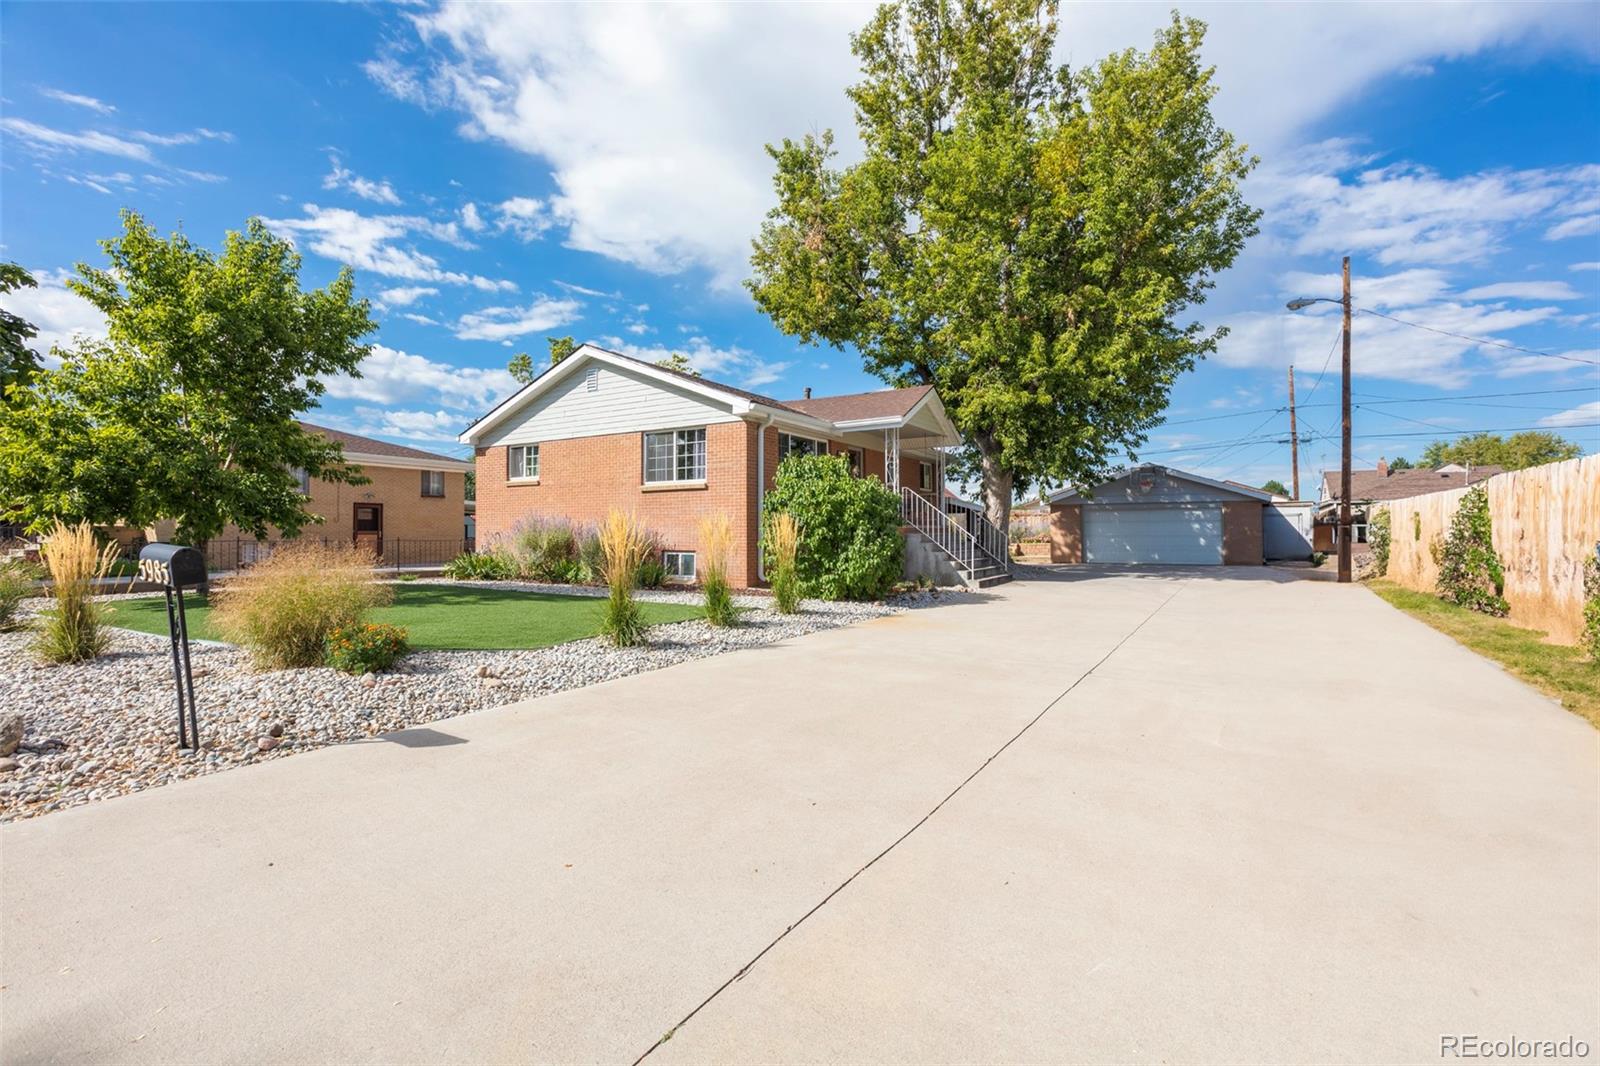 5985  grape street, commerce city sold home. Closed on 2023-10-24 for $440,000.